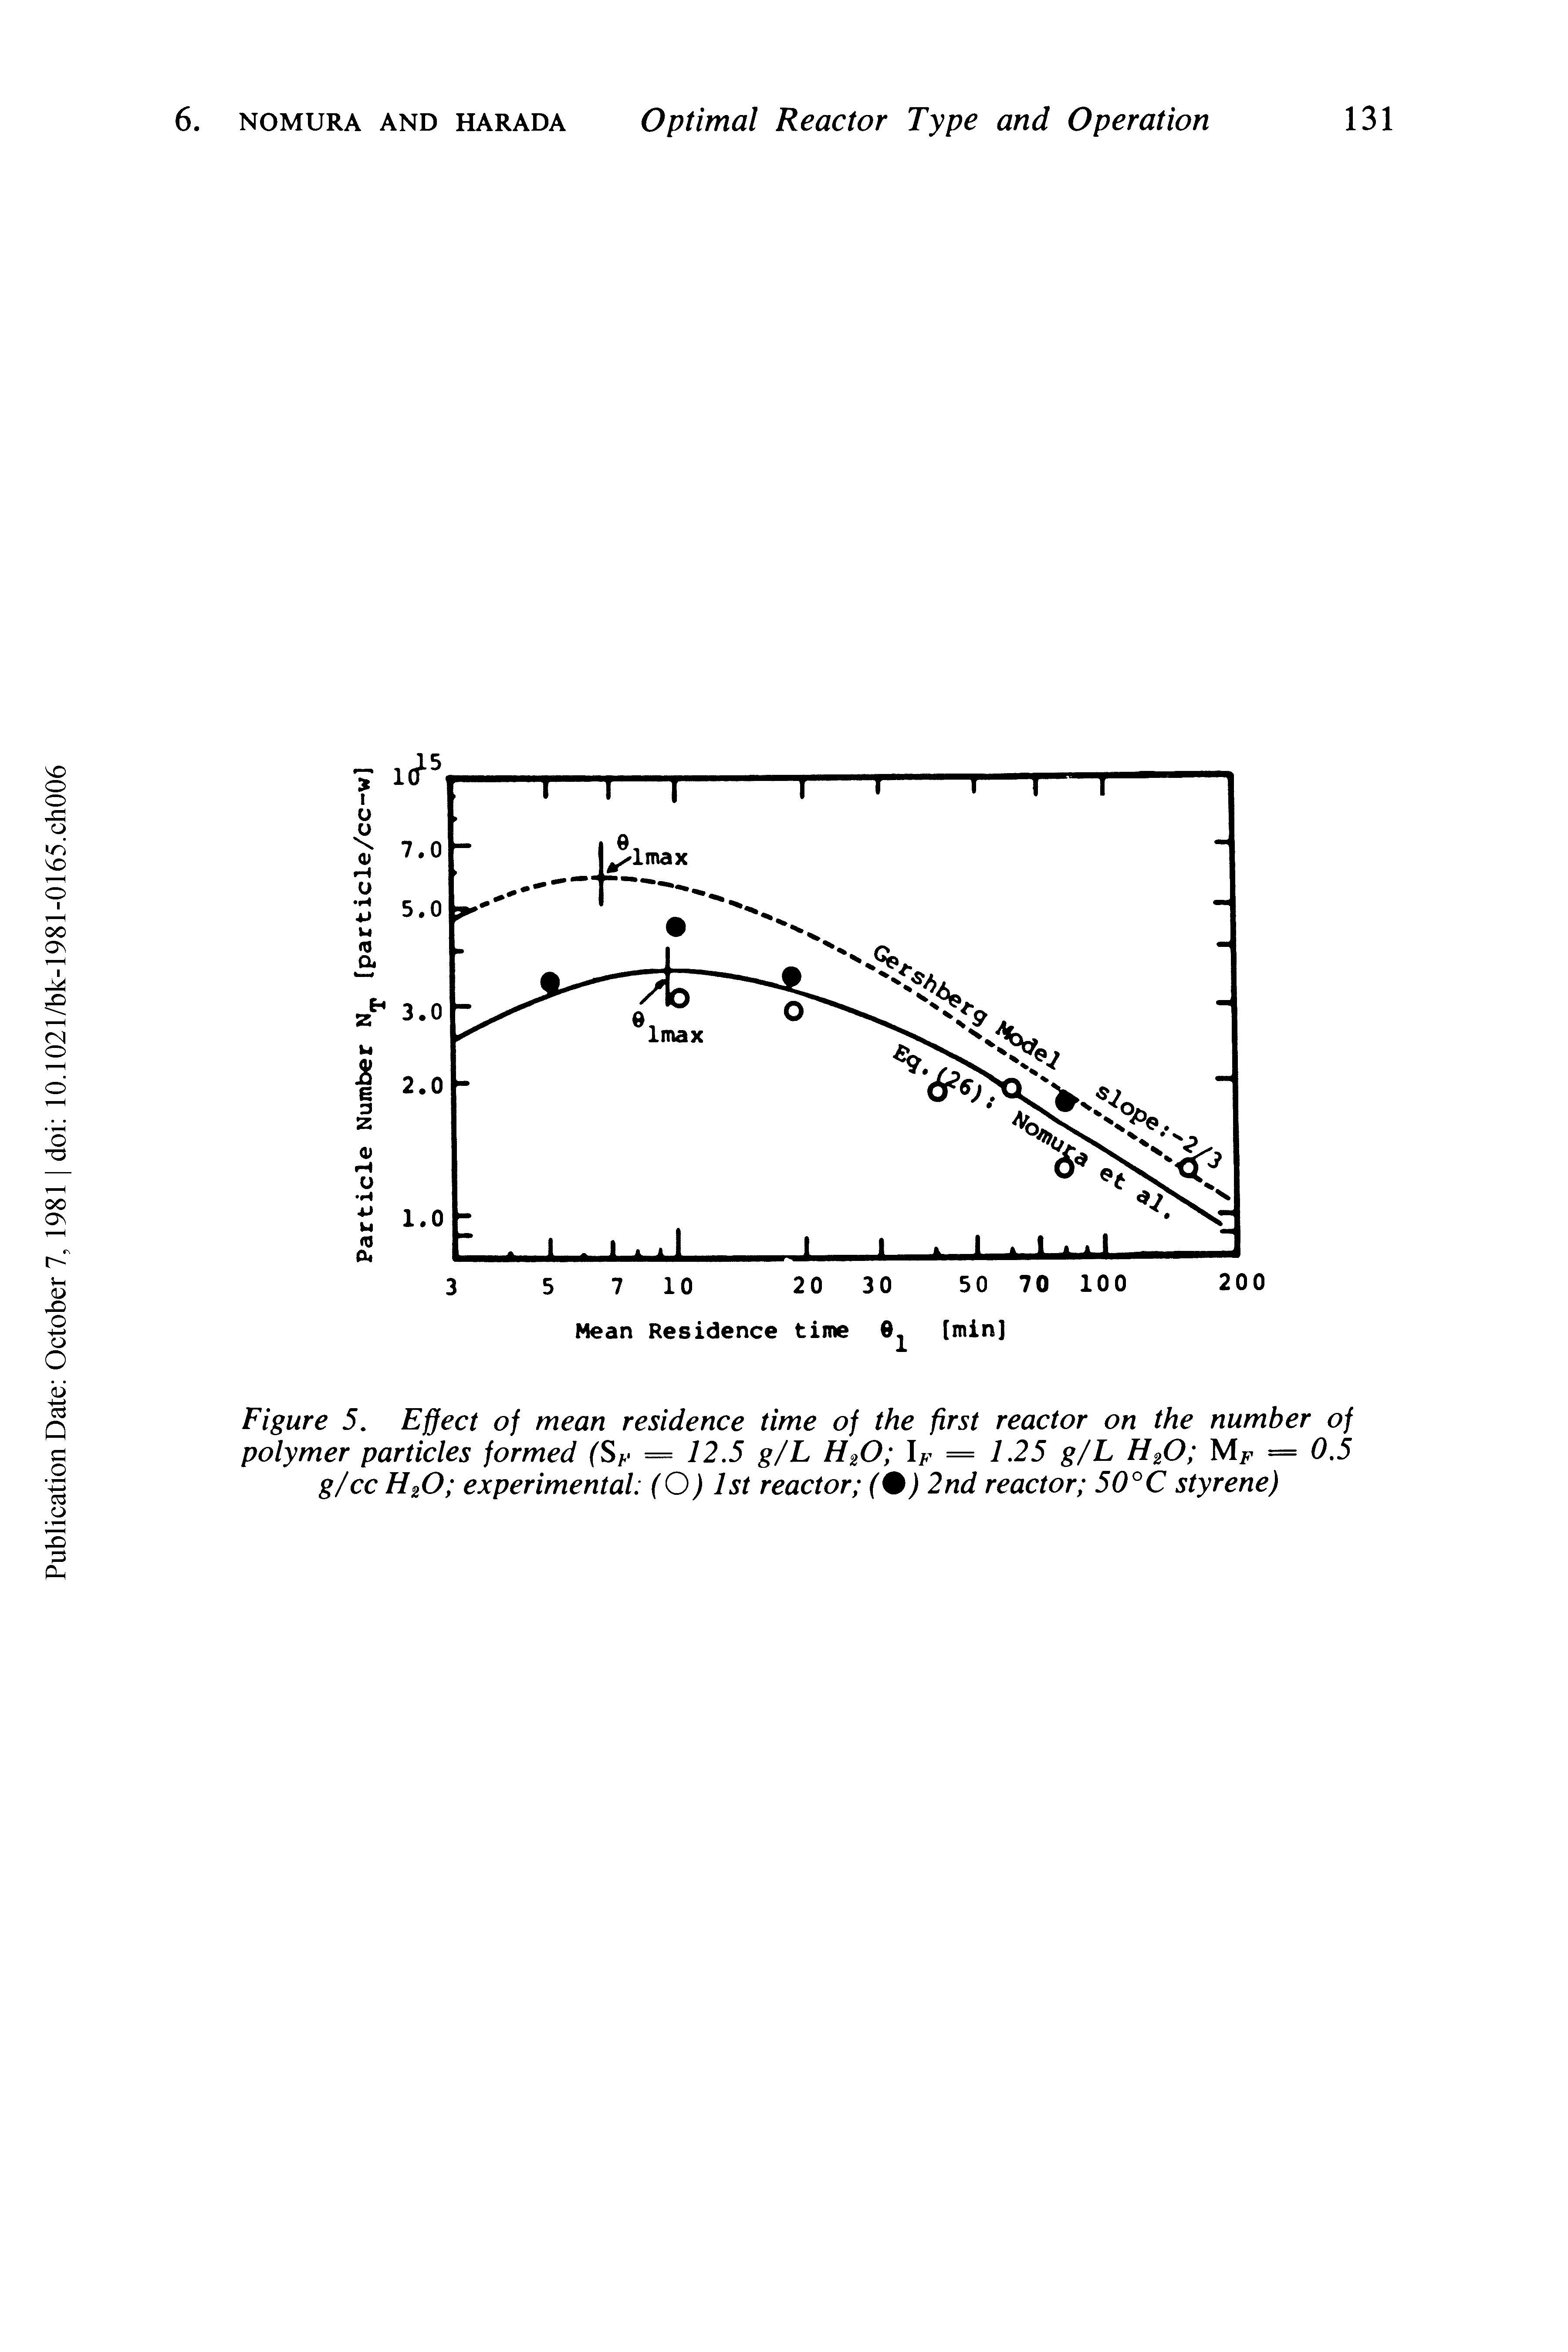 Figure 5. Effect of mean residence time of the first reactor on the number of polymer particles formed (SF = 12.5 g/L H20 lF = 1.25 g/L H20 = 0.5...